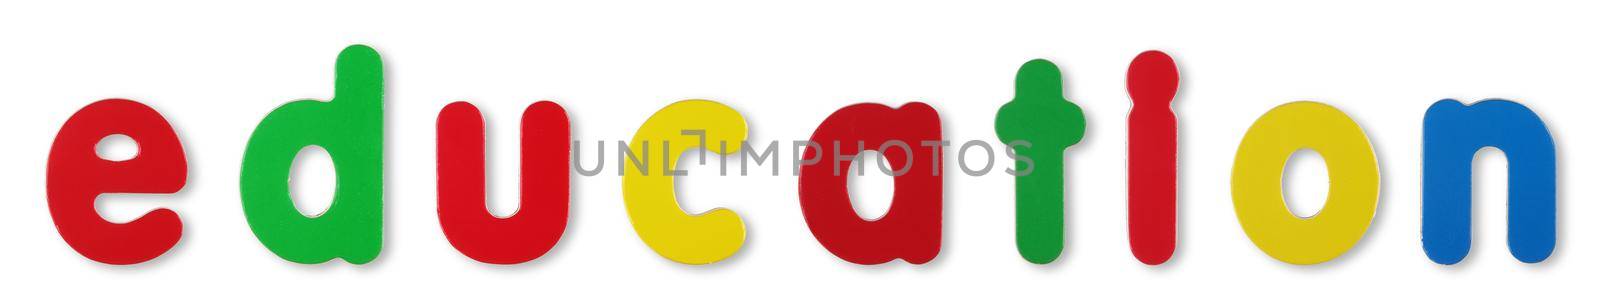 Education coloured magnetic letters on white with clipping path to remove shadow by VivacityImages